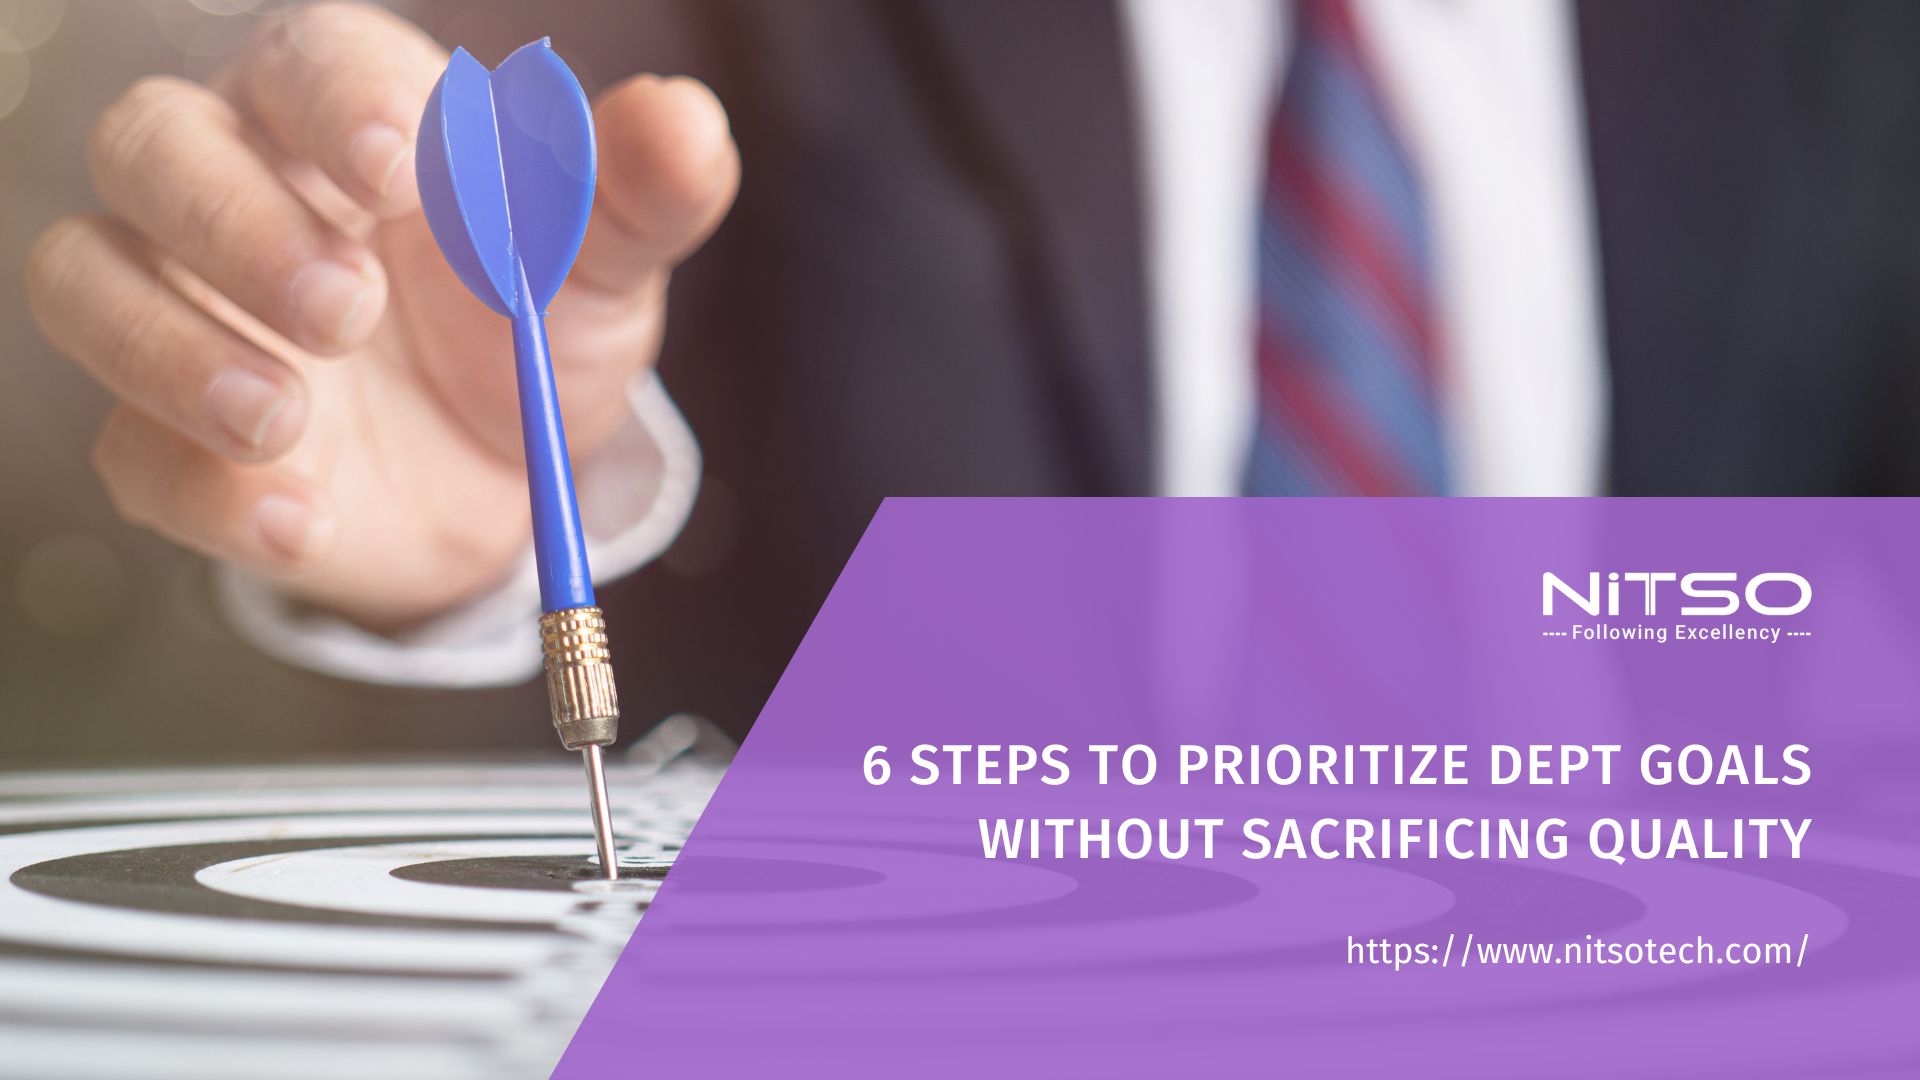 How to Prioritize Department Goals Without Sacrificing Quality